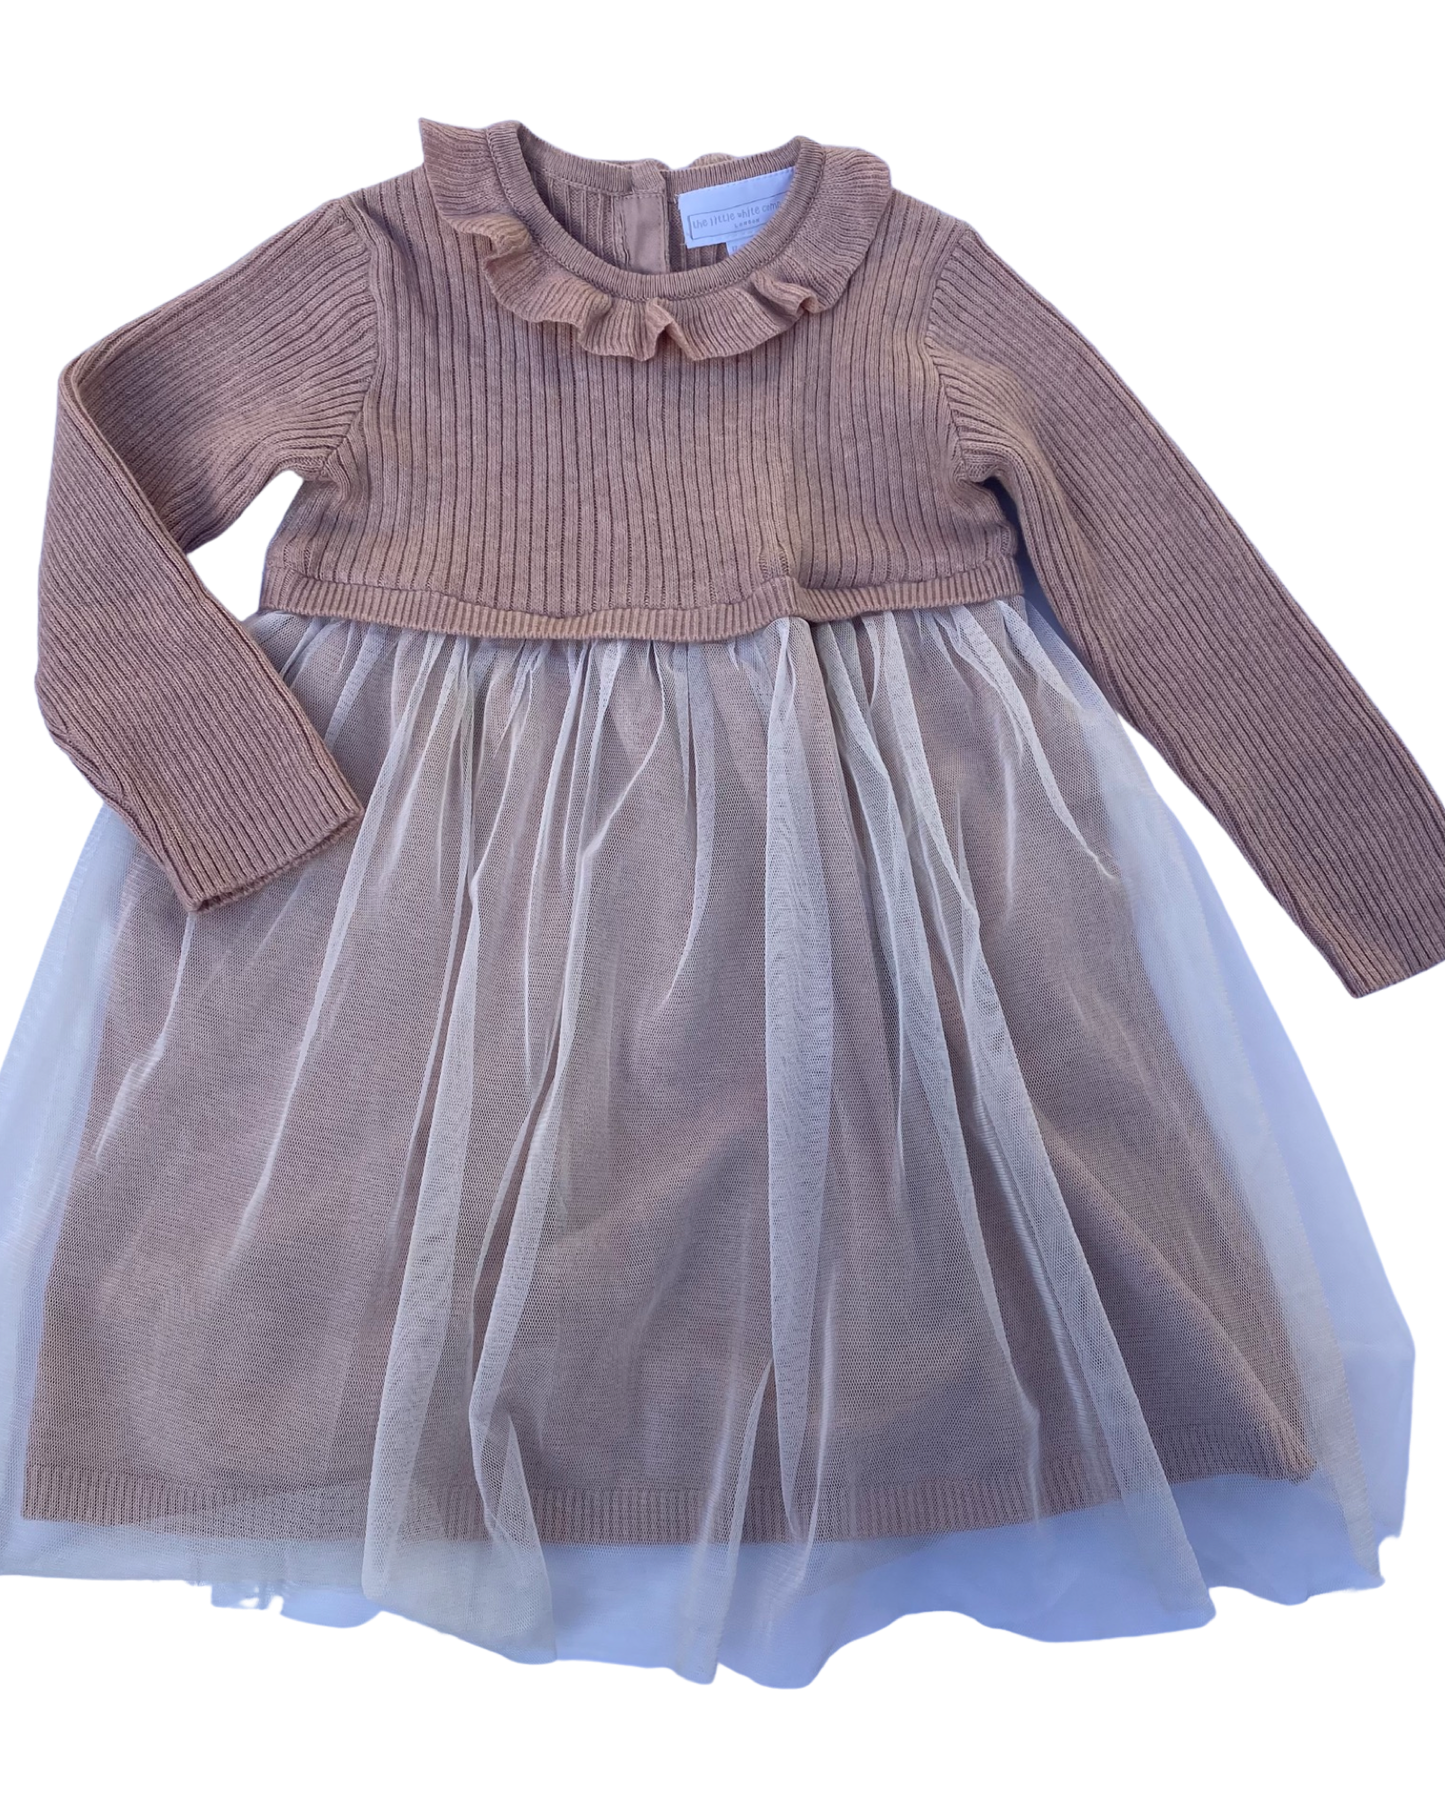 The Little White Company knitted party dress (size 12-18mths)